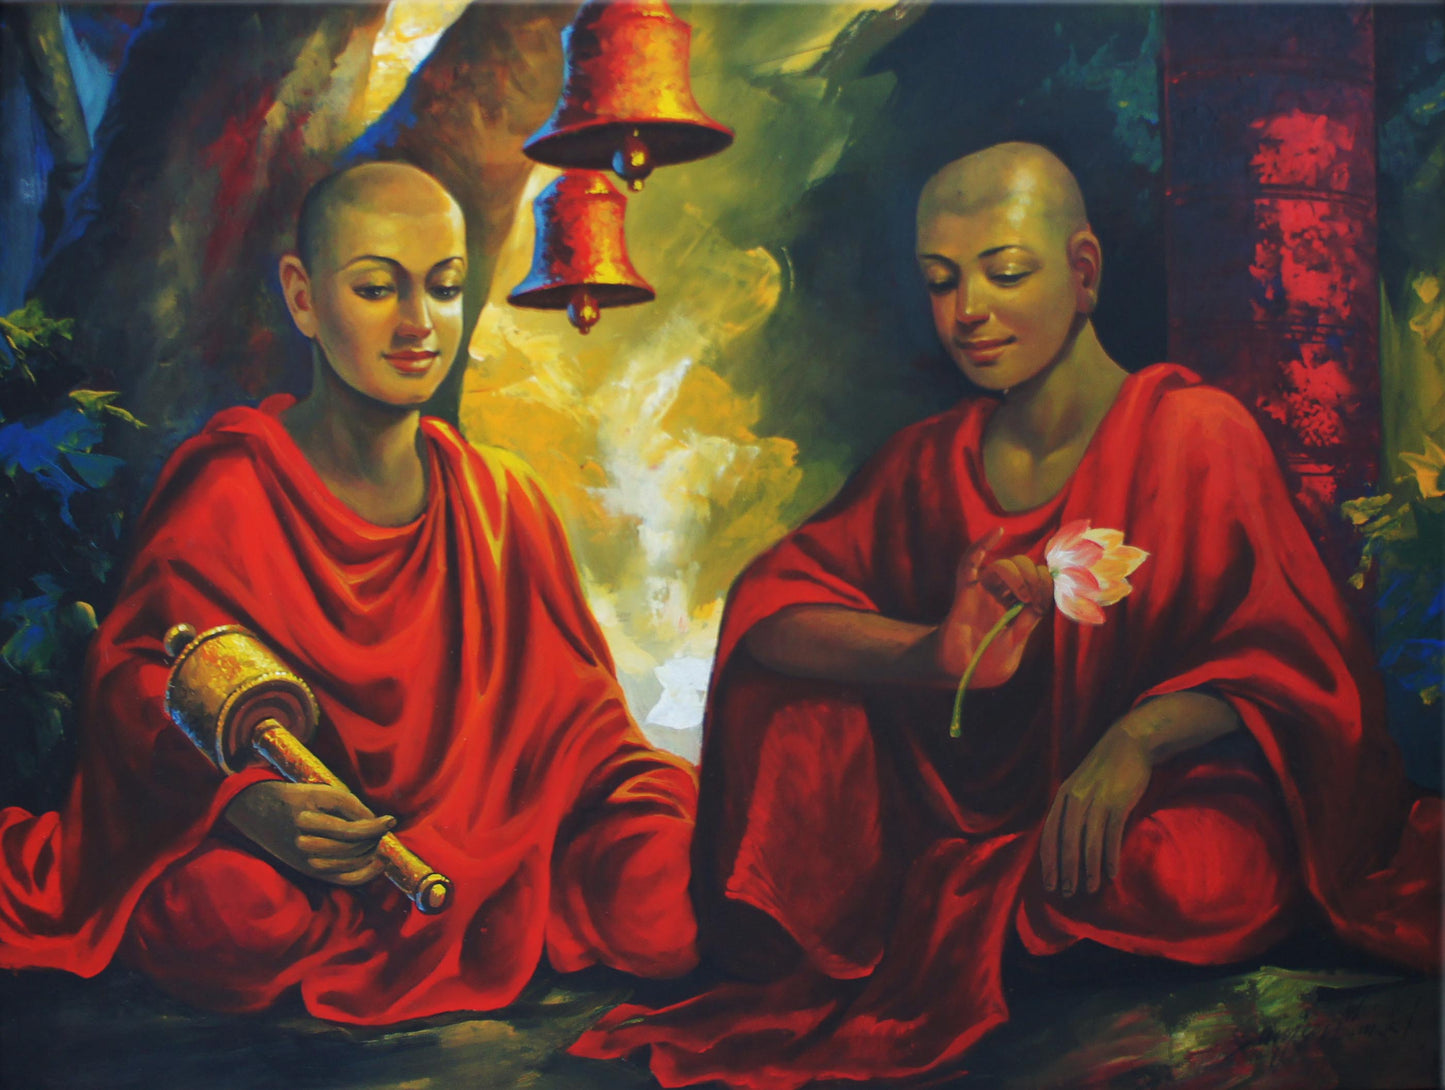 Two Monks With Bell - By Sanjeev Mandal